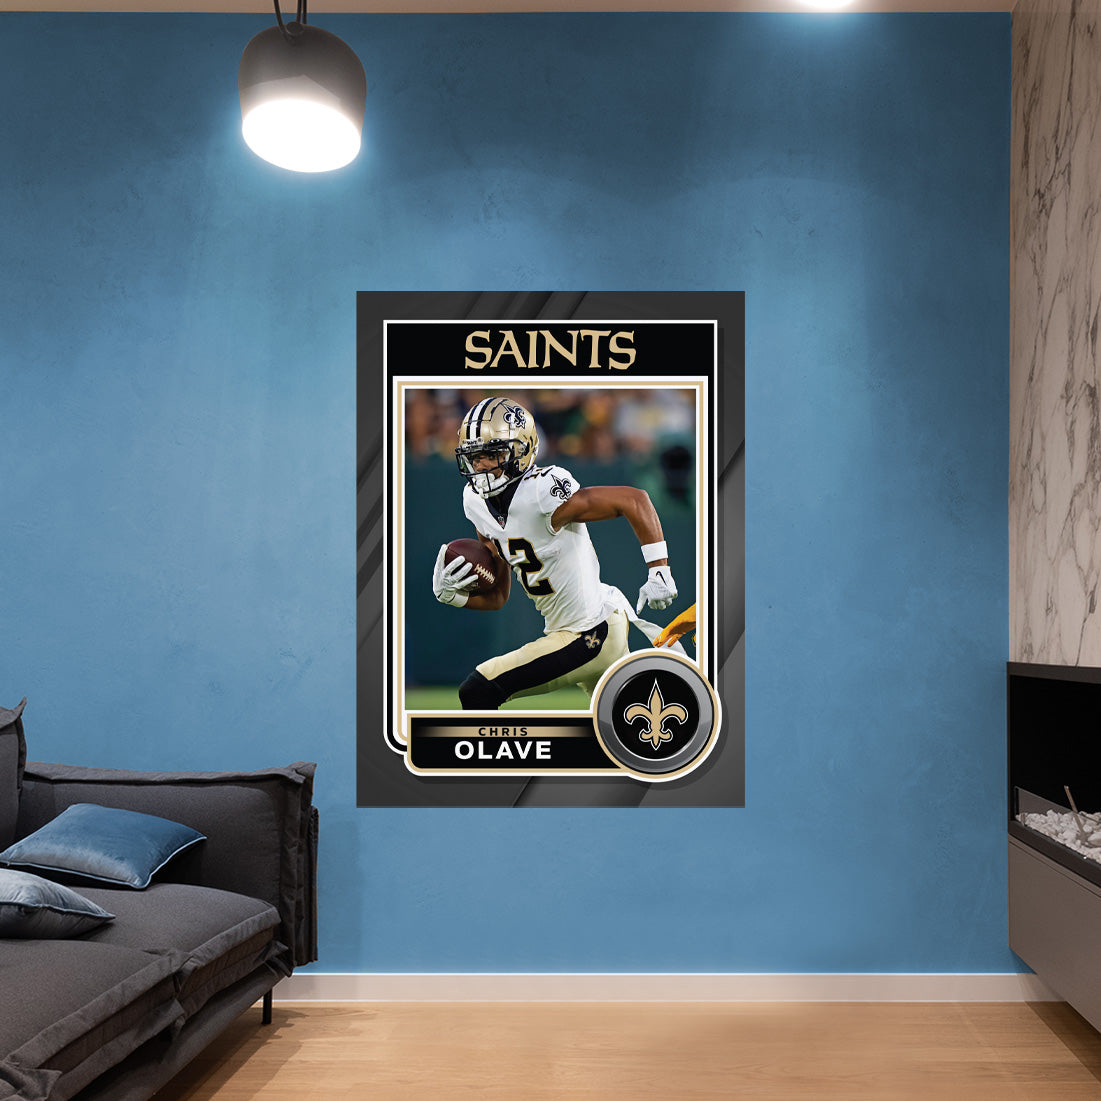 New Orleans Saints: Chris Olave Poster - Officially Licensed NFL Removable Adhesive Decal